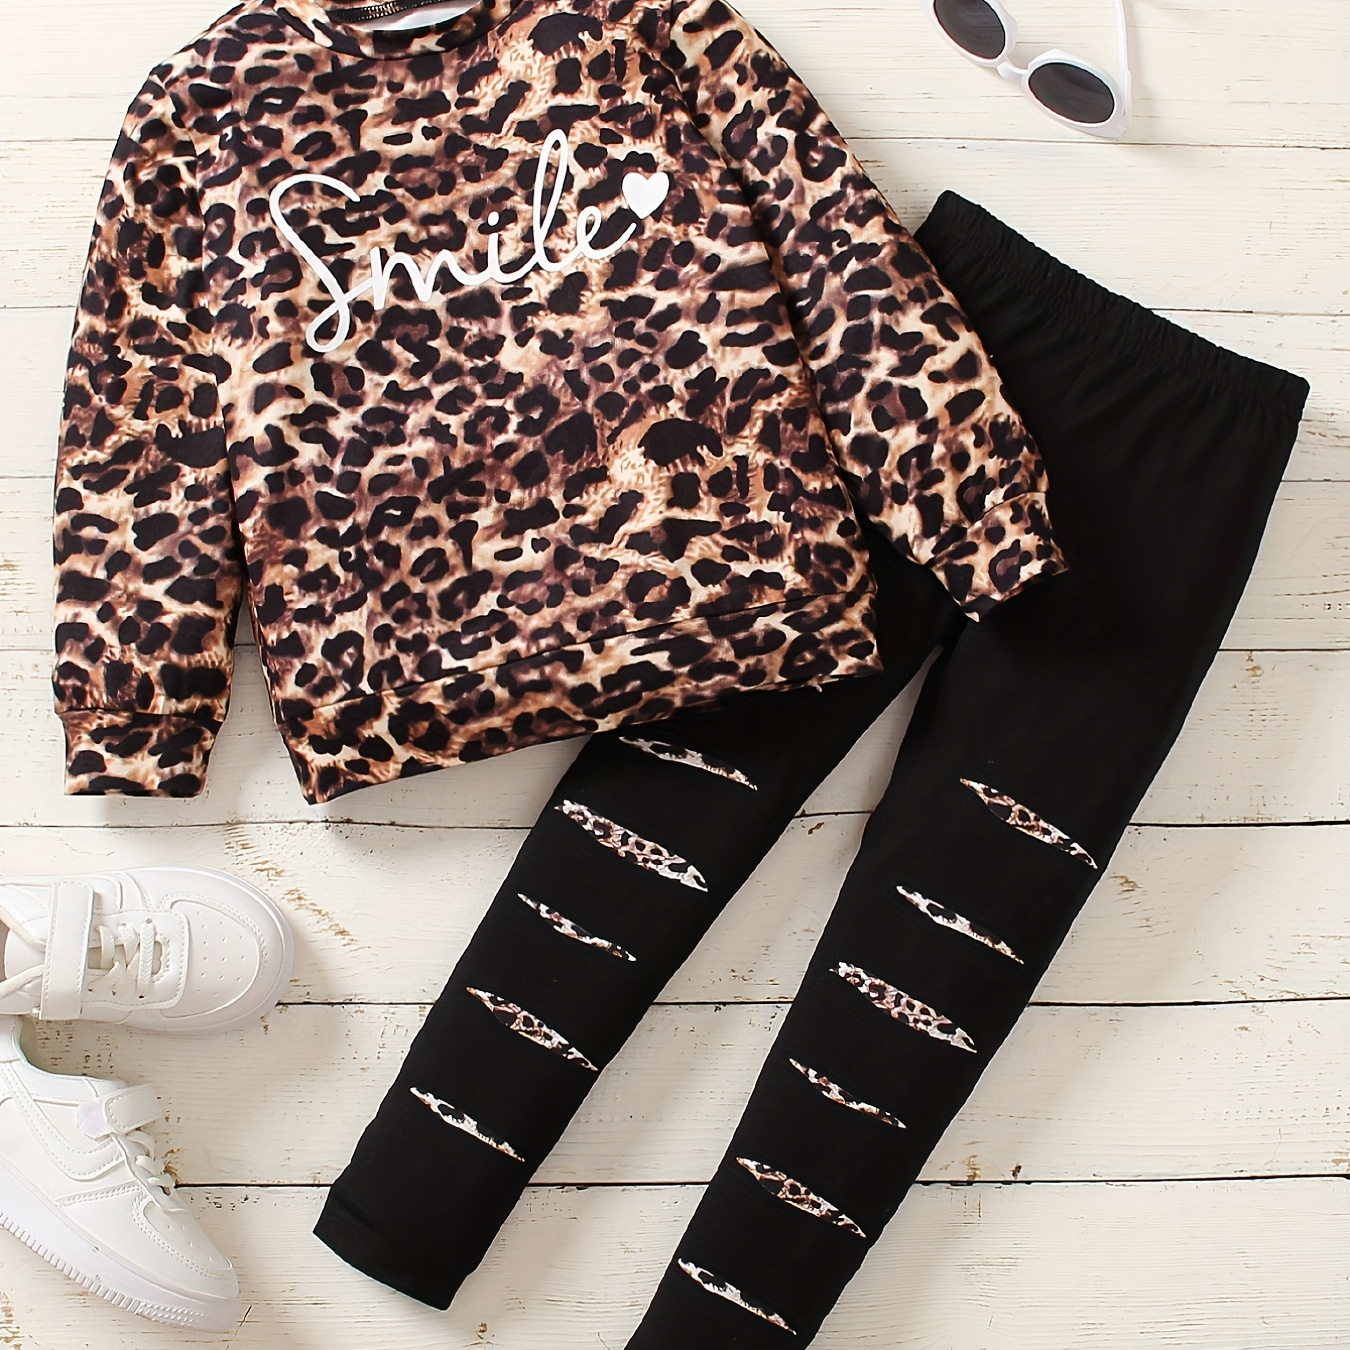 

Girl's Leopard Pattern Outfit 2pcs, Sweatshirt & Ripped Legging Set, Smile Print Kid's Clothes For Spring Fall